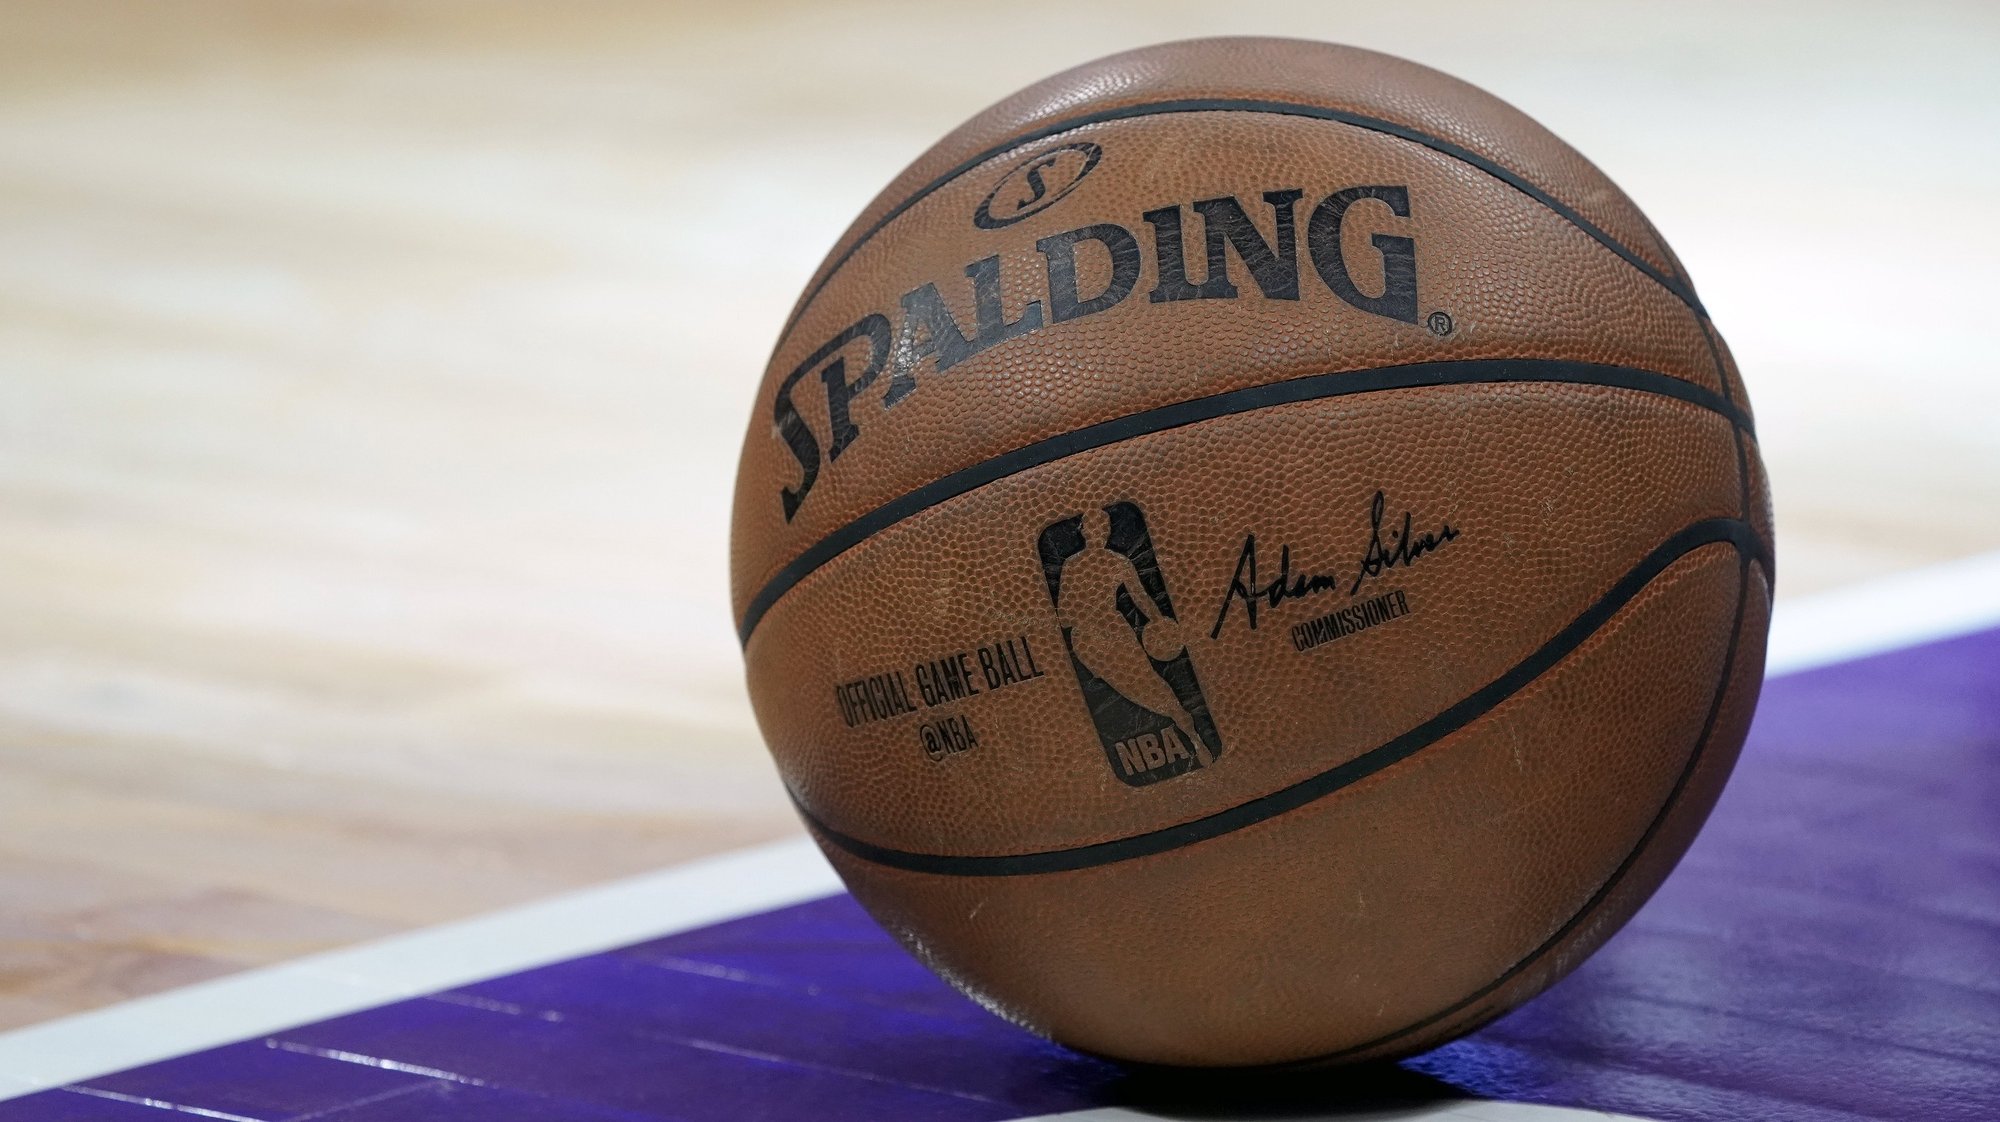 epa06629728 The game ball is on the floor during a time-out in the NBA basketball game between the Boston Celtics and the Sacramento Kings at Golden 1 Center in Sacramento, California, USA, 25 March 2018.  EPA/JOHN G. MABANGLO  SHUTTERSTOCK OUT